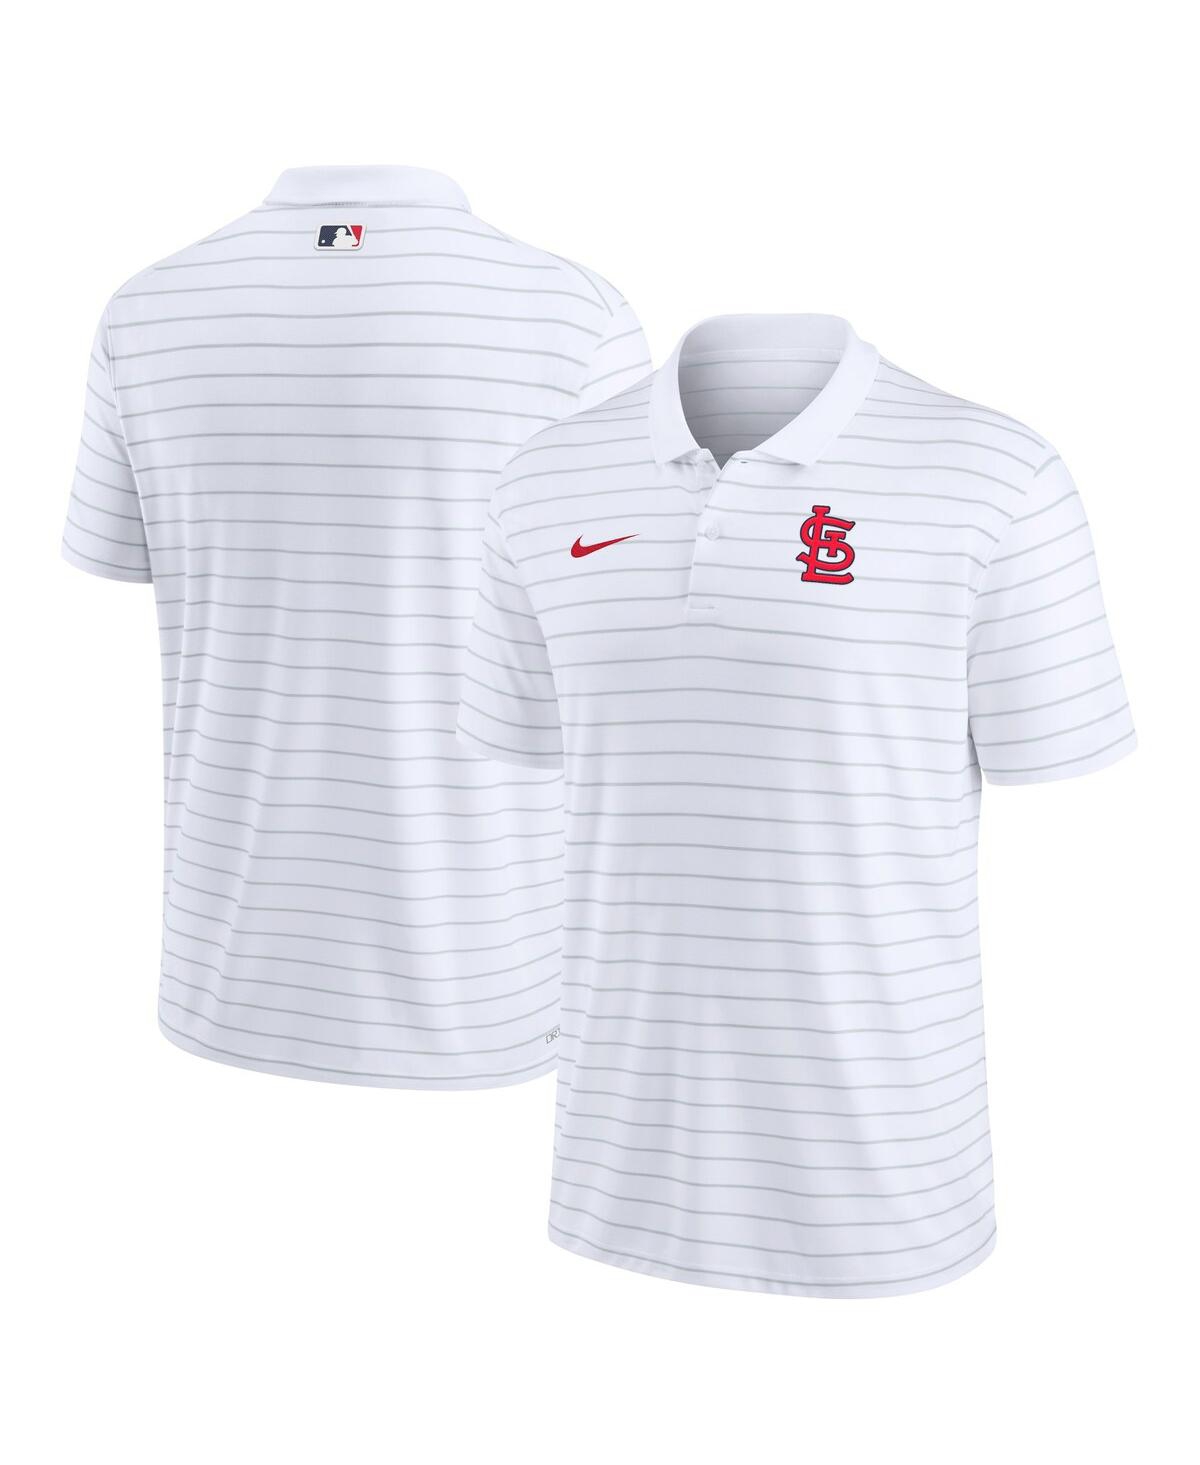 Men's Nike White St. Louis Cardinals Authentic Collection Victory Striped Performance Polo Shirt - White